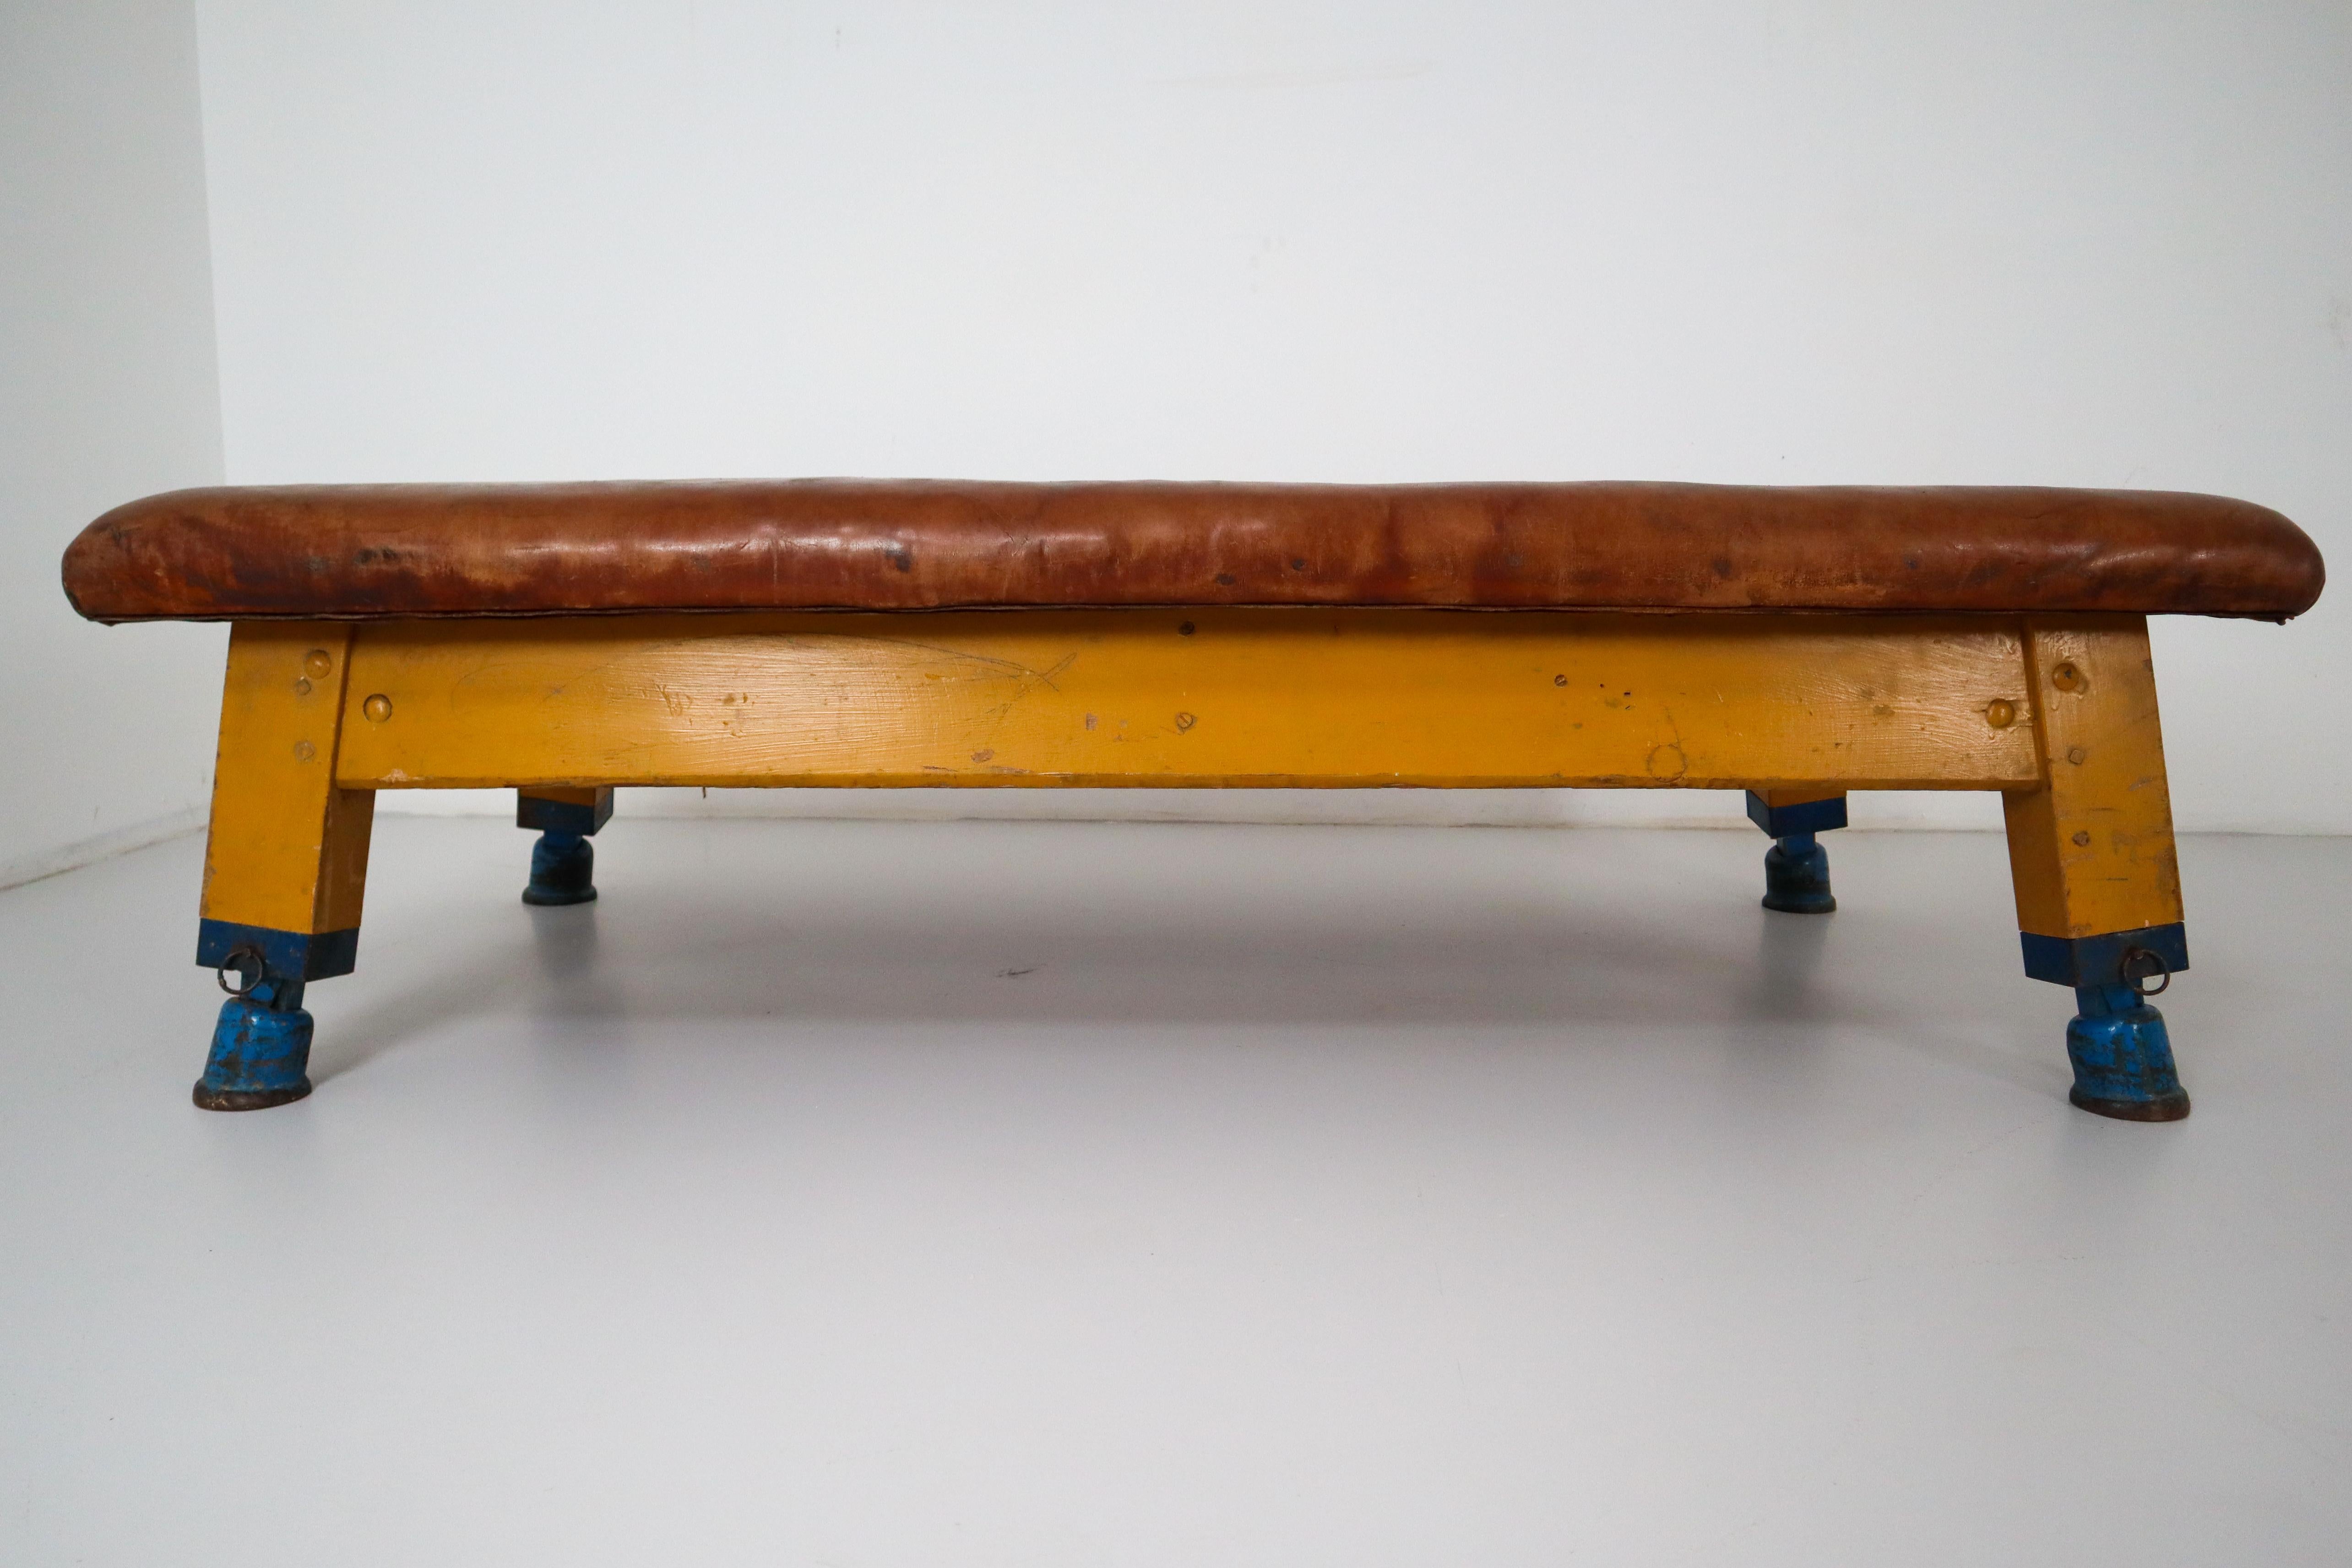 Strong, vintage European gymnasium bench with a patinated leather covered top that sits in to the bench's solid wooden frame. The gym bench frame maintains its original markings where the straps and rings were once held. Each of the four legs has a